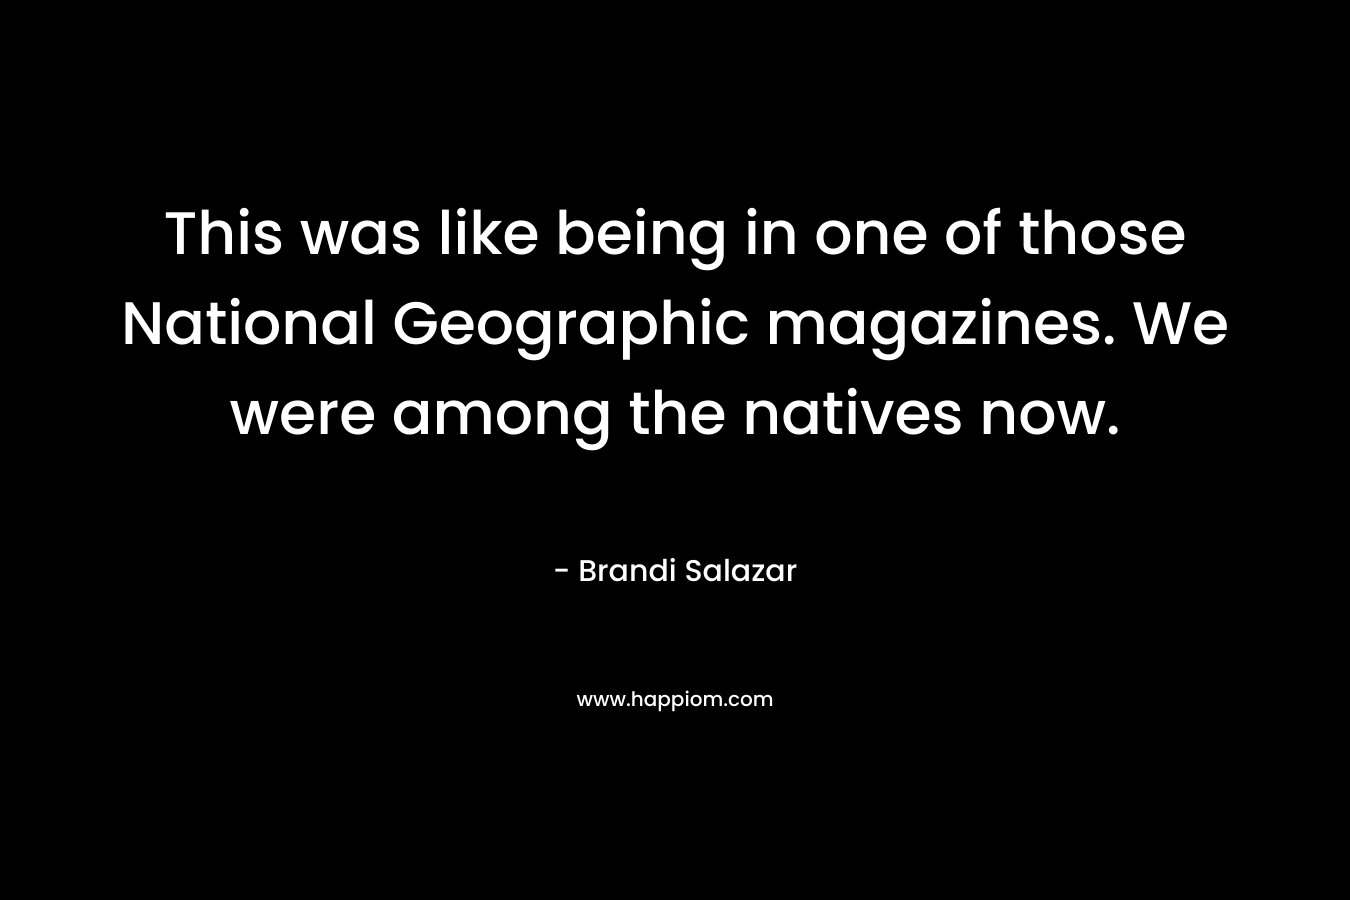 This was like being in one of those National Geographic magazines. We were among the natives now. – Brandi Salazar